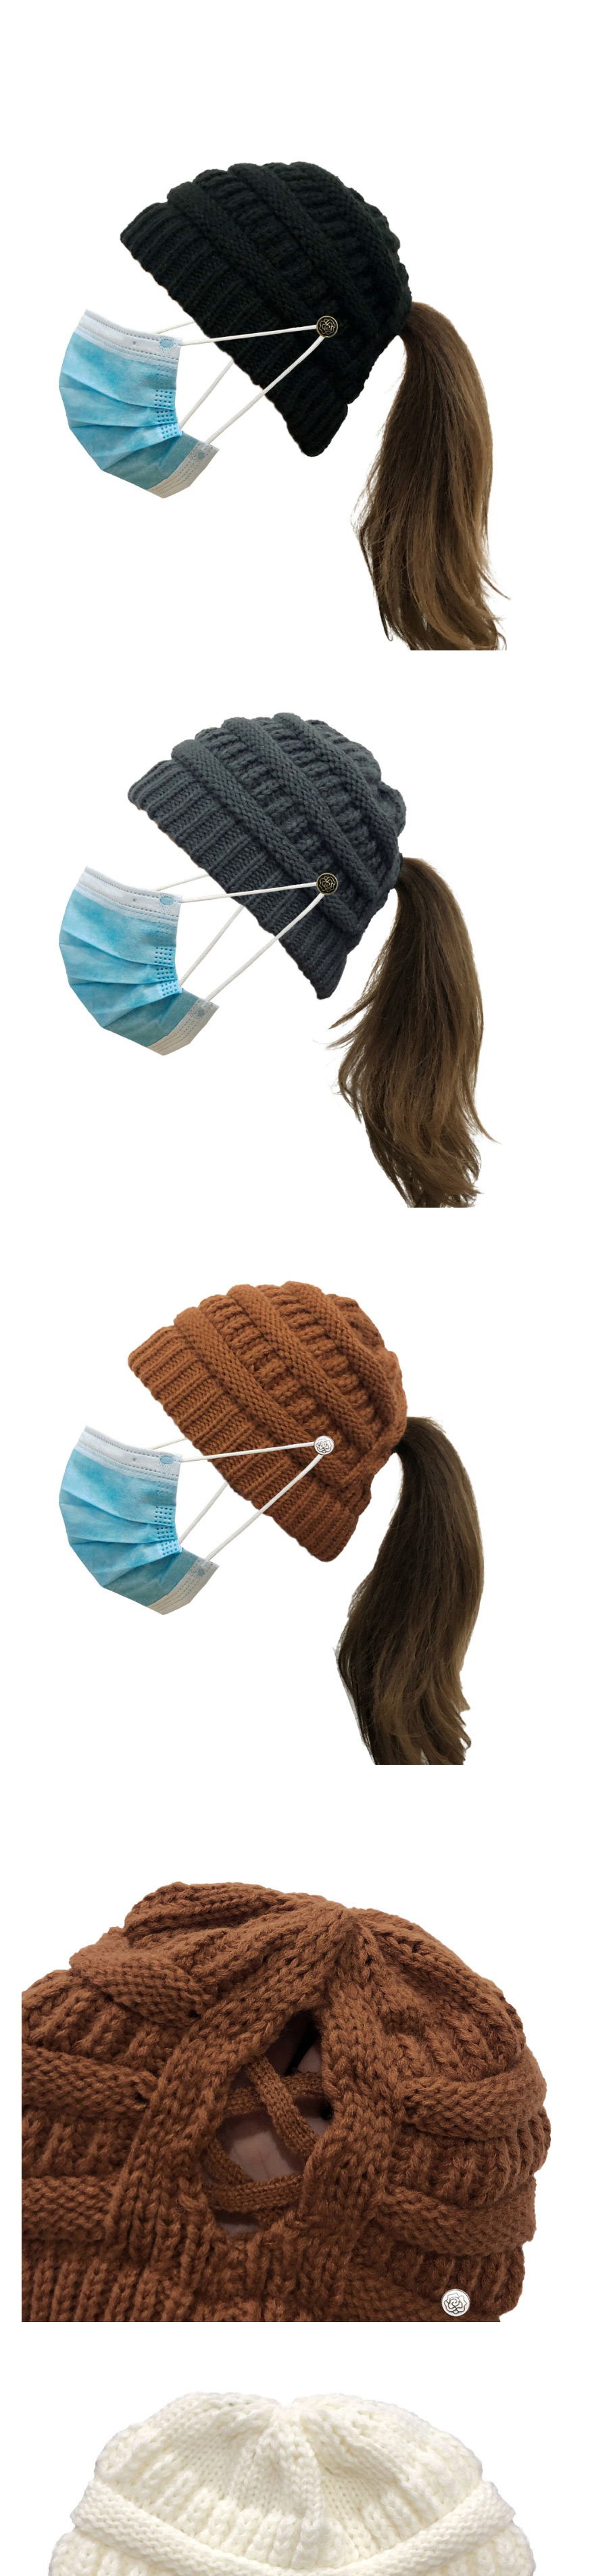 Fashion Claret Button Detachable Cross-back Ponytail Knitted Hat,Knitting Wool Hats